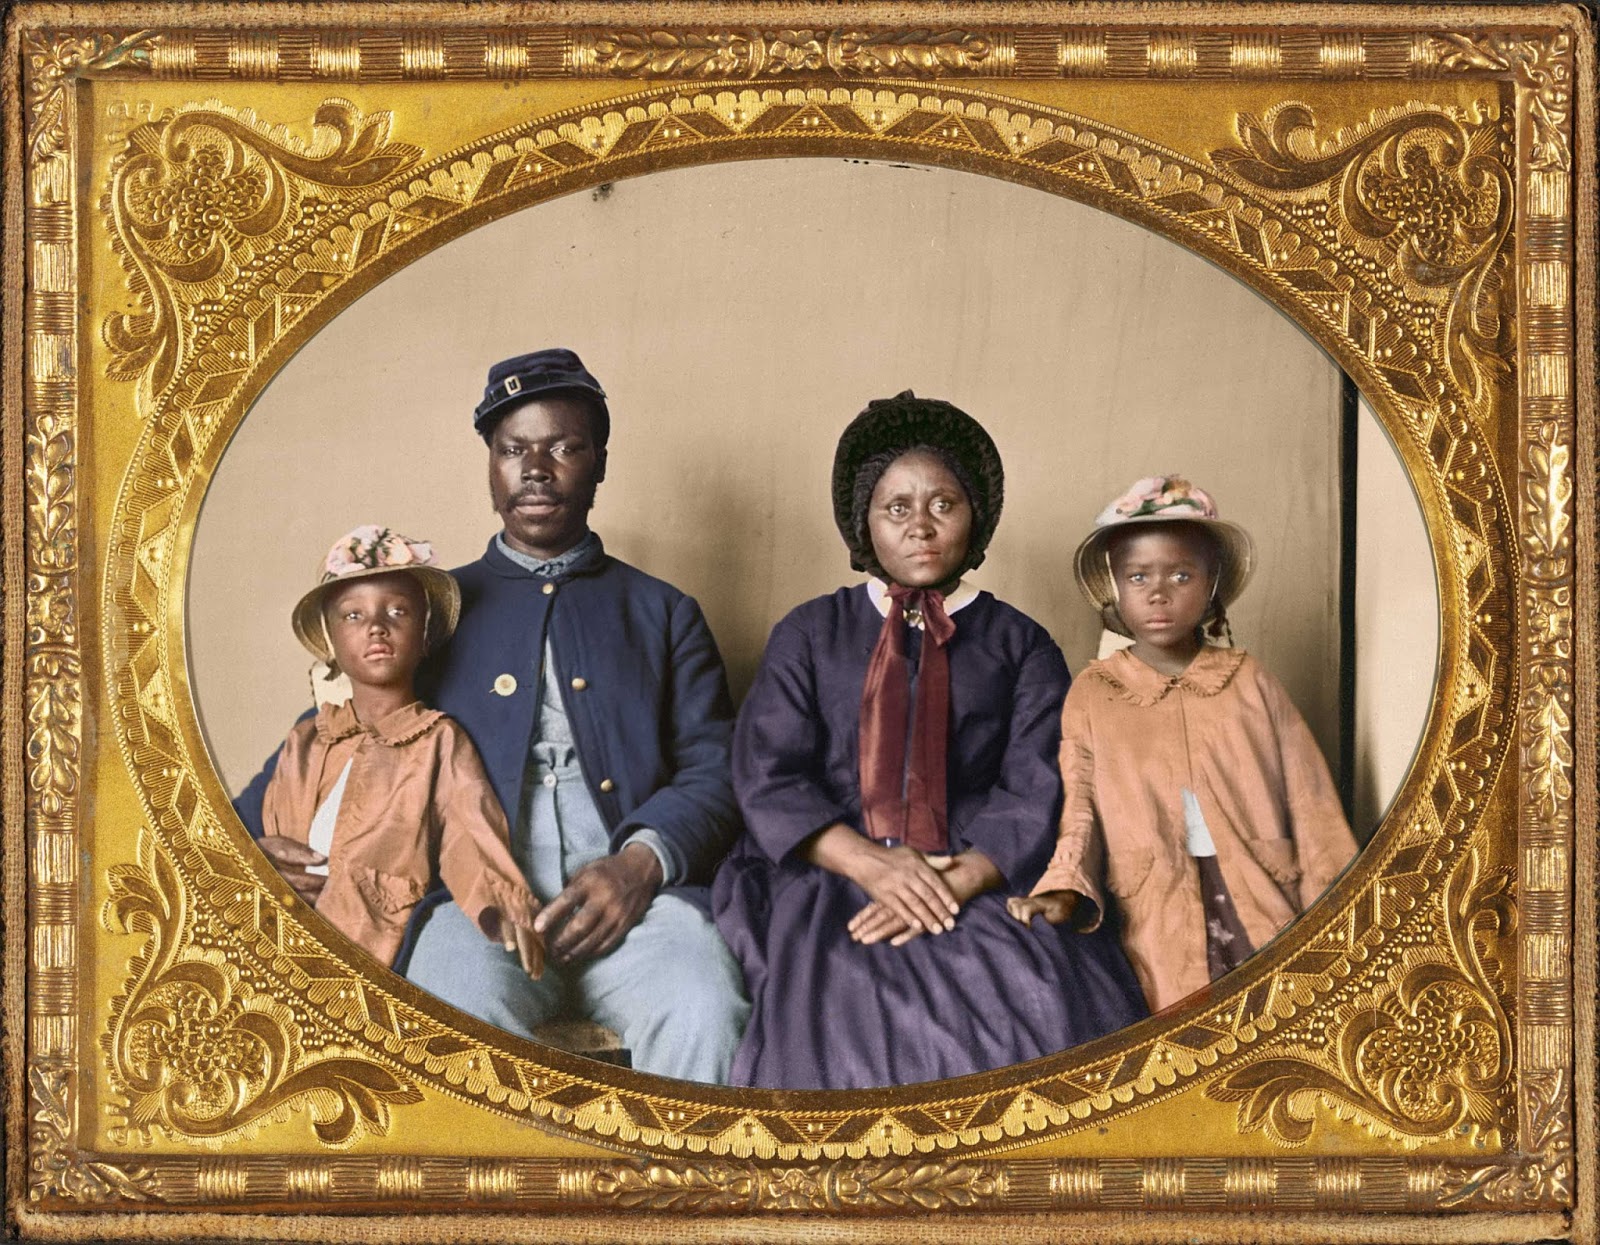 X-slave who now serves with the Union forces sits for a portrait with his family.